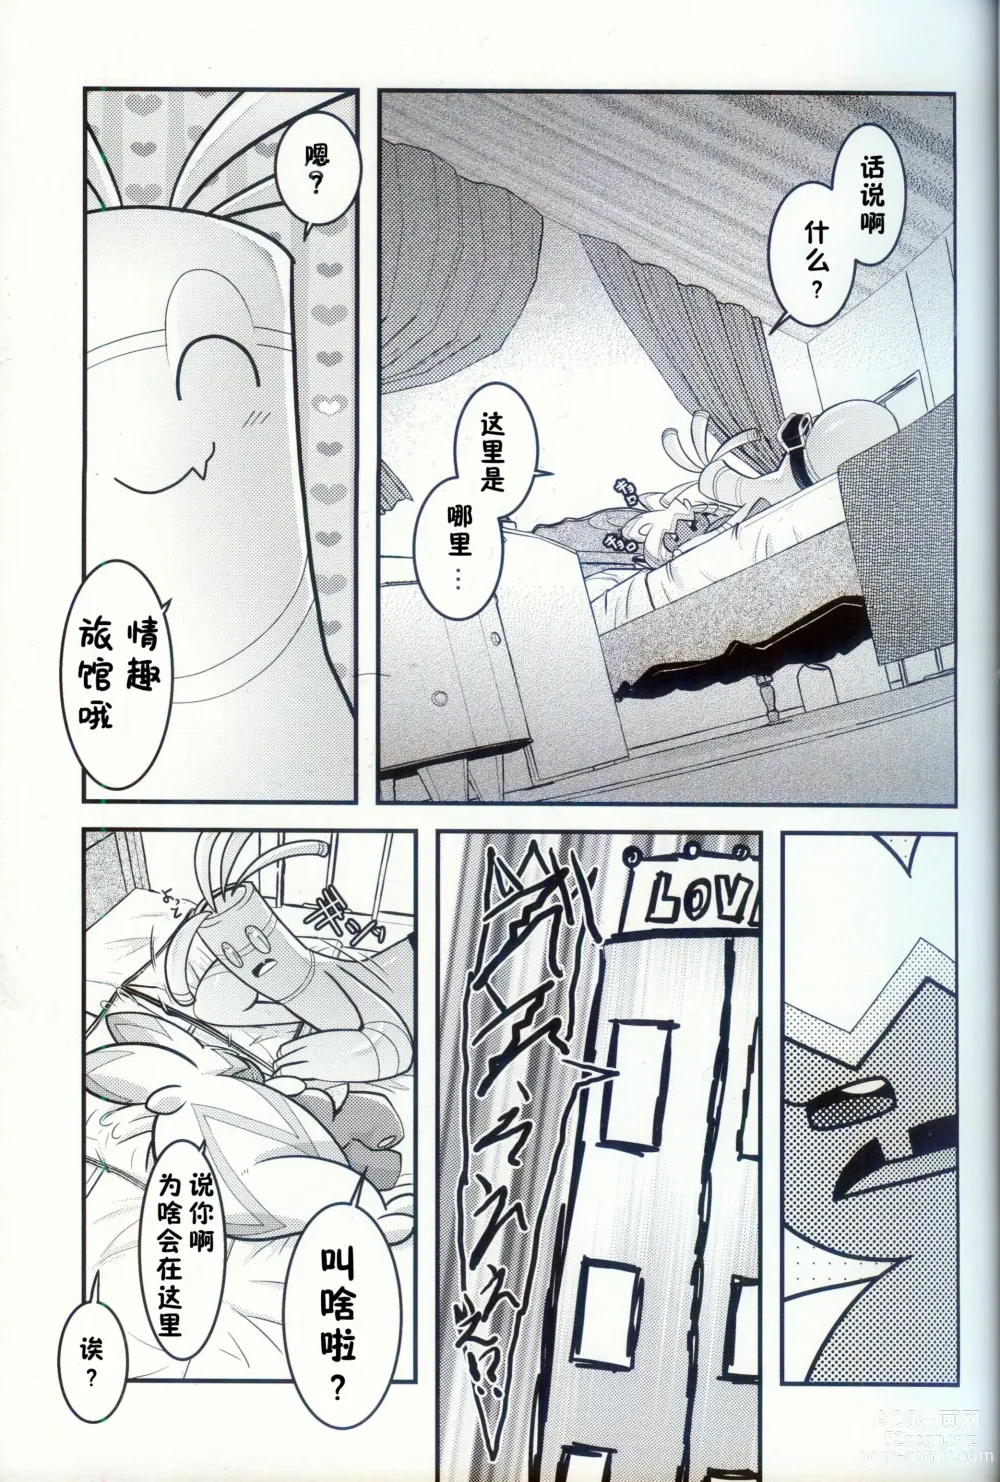 Page 12 of doujinshi 横滨的塞富豪巨锻匠